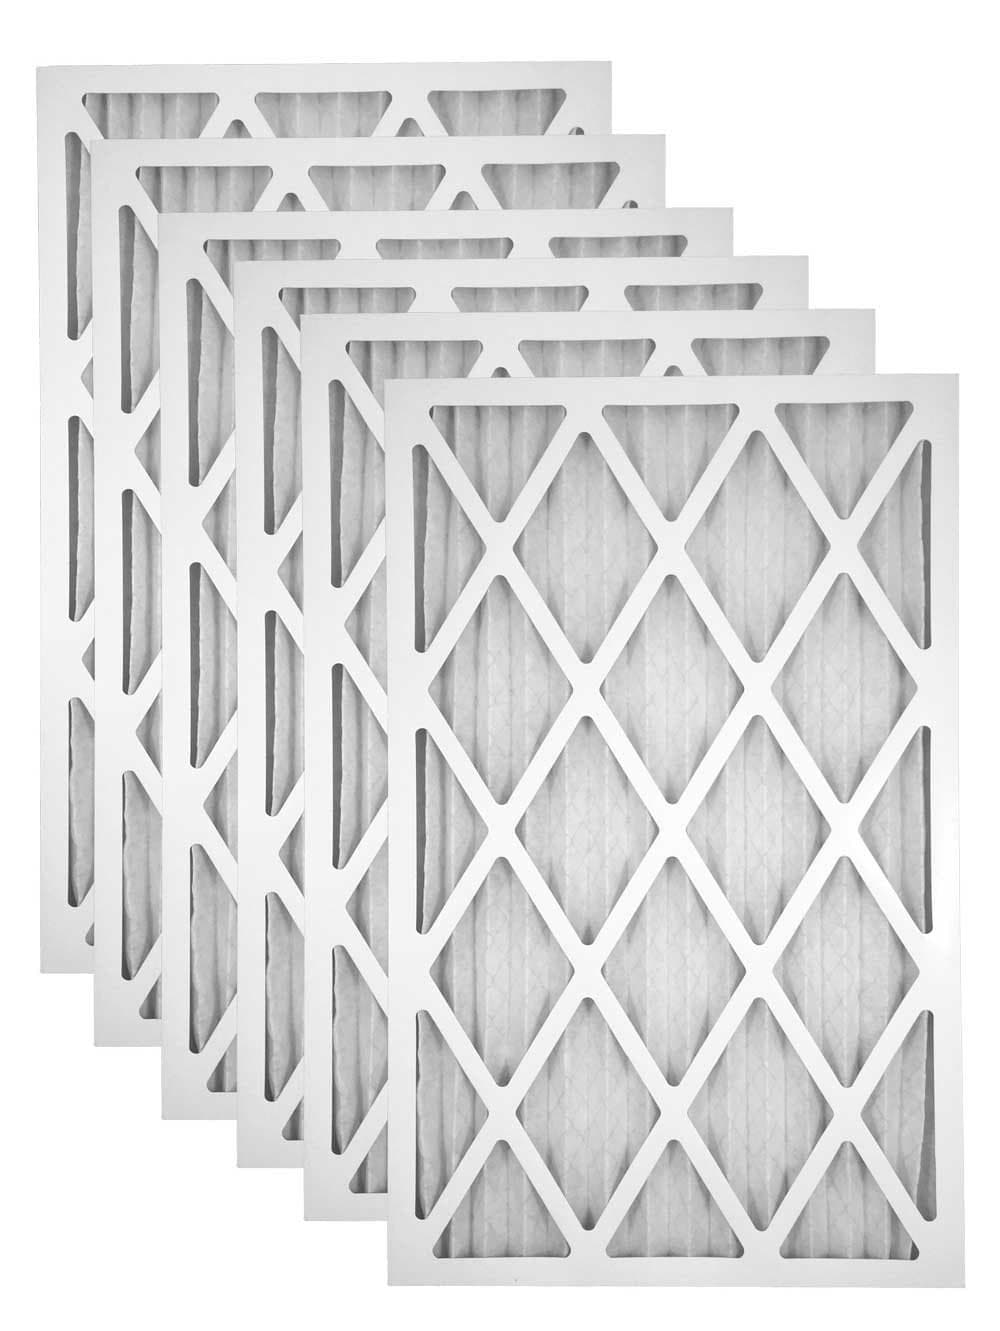 25x25x1 MERV 8 Pleated Geothermal Furnace Filter - Case of 6